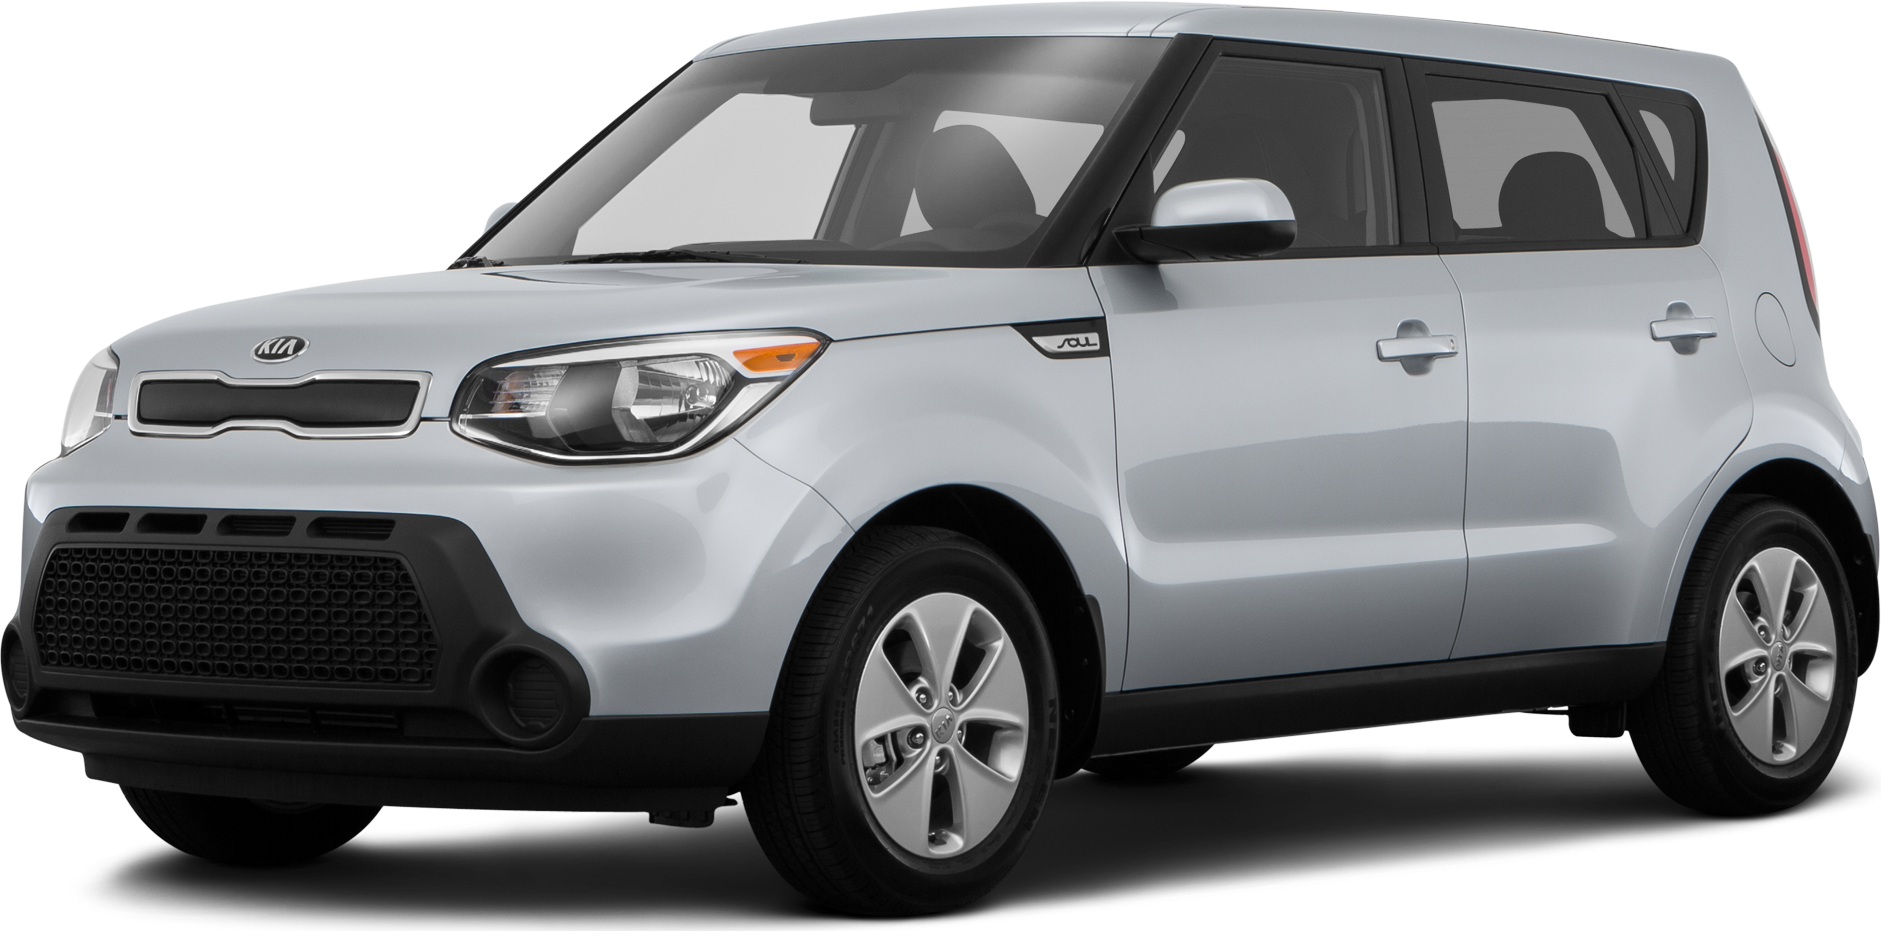 2016 Kia Soul Prices, Reviews, and Photos - MotorTrend